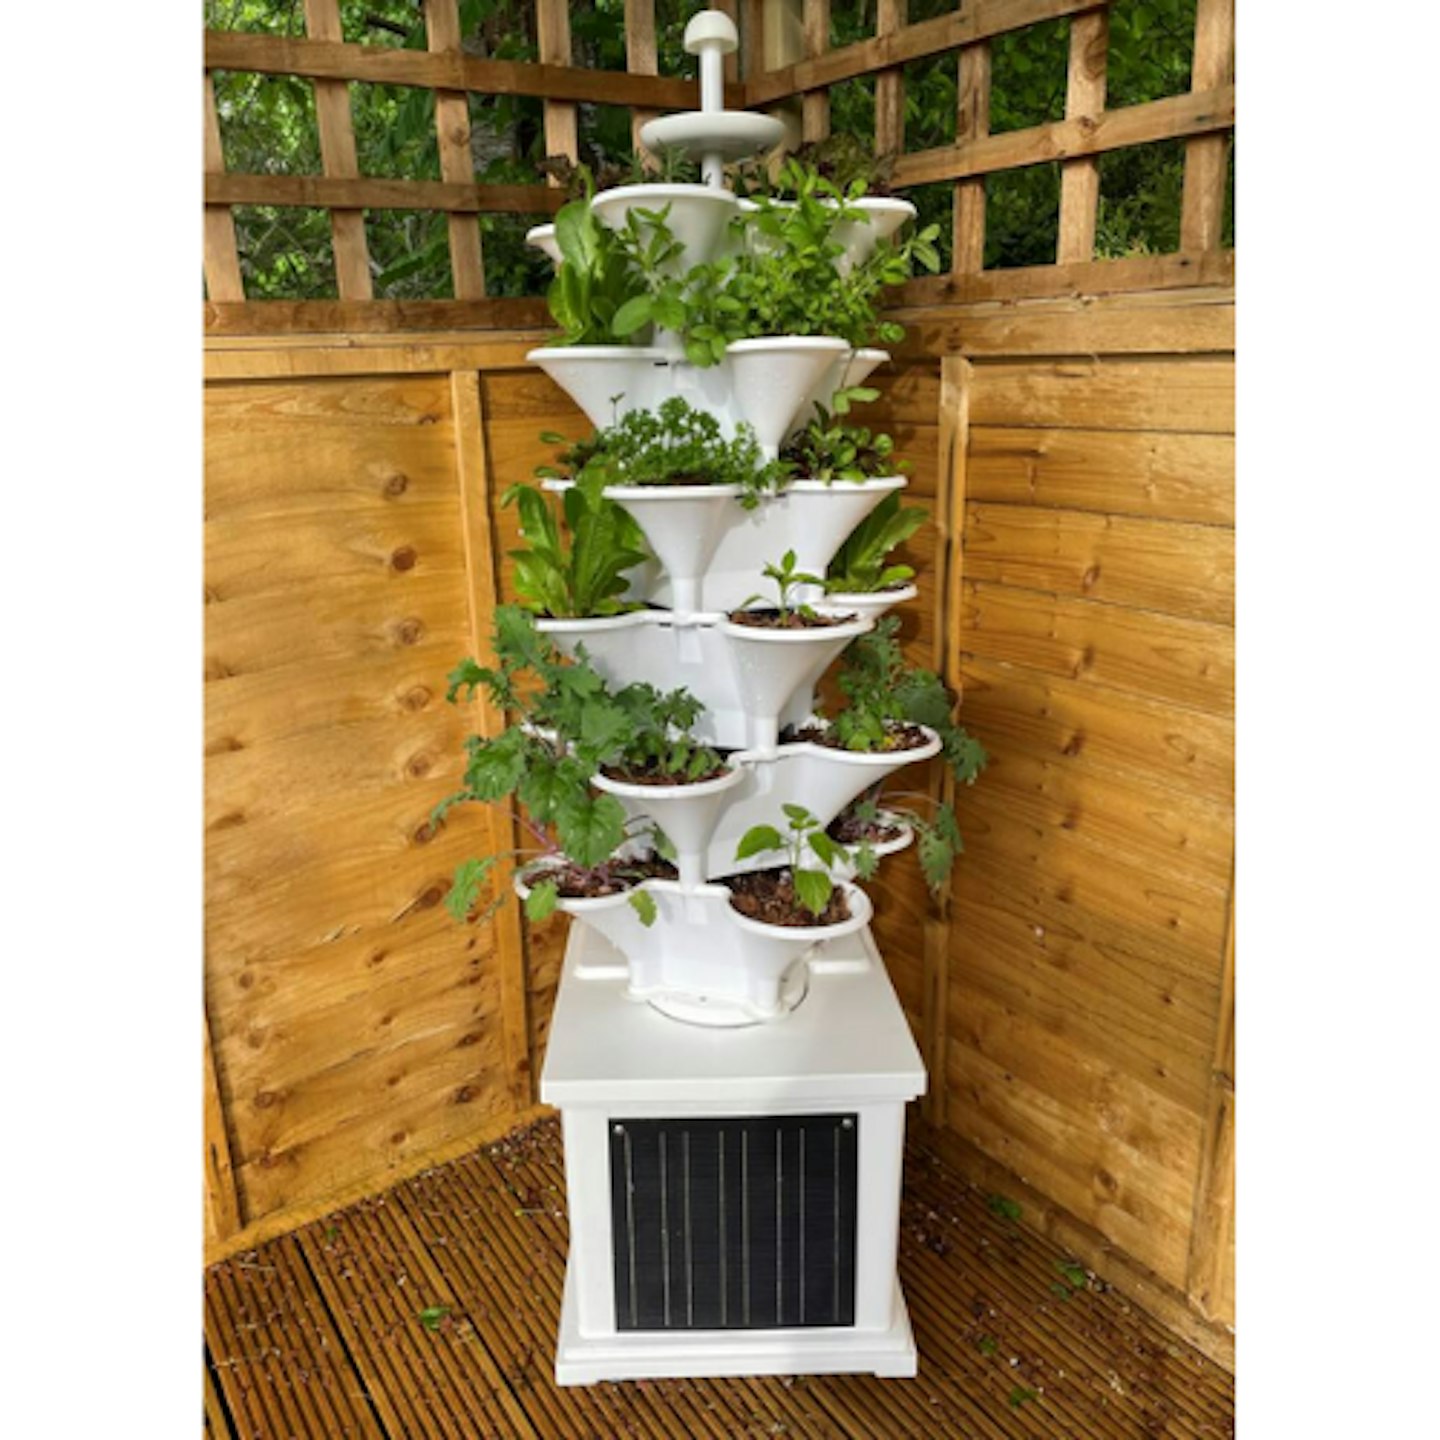 Acqua Garden Two: Solar-Powered Vertical Growing System